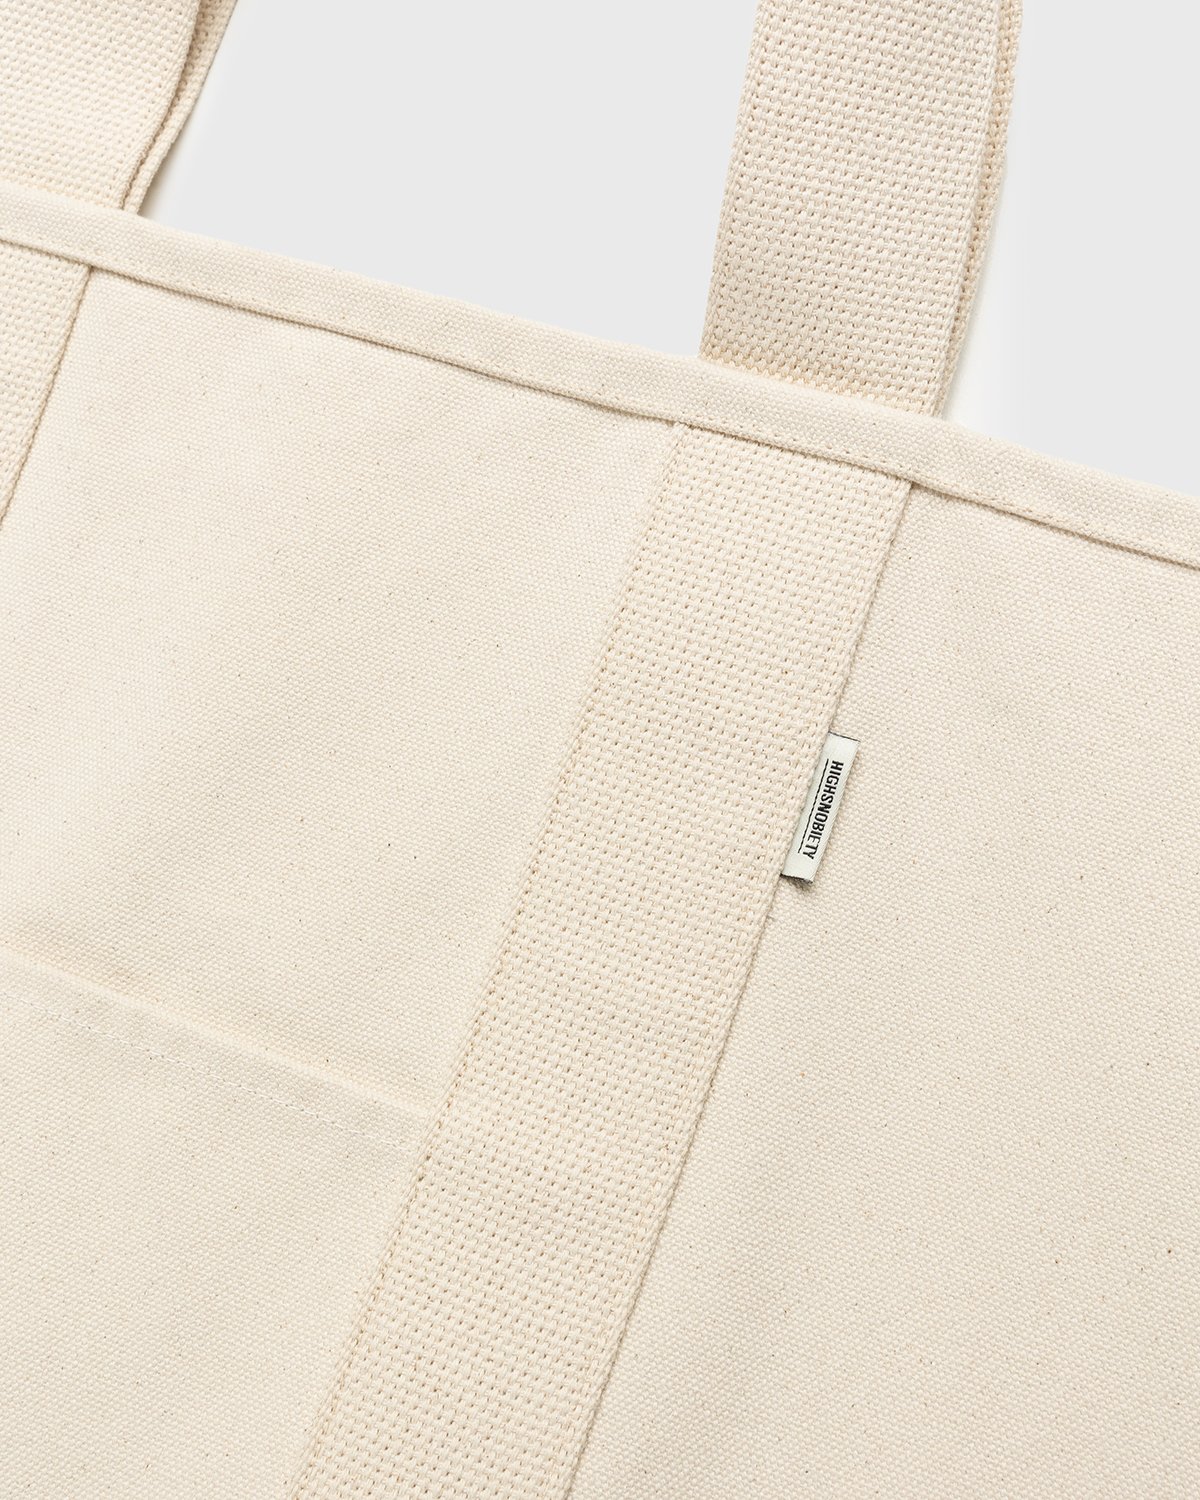 Highsnobiety - XL Canvas "H" Tote Natural - Accessories - Beige - Image 3